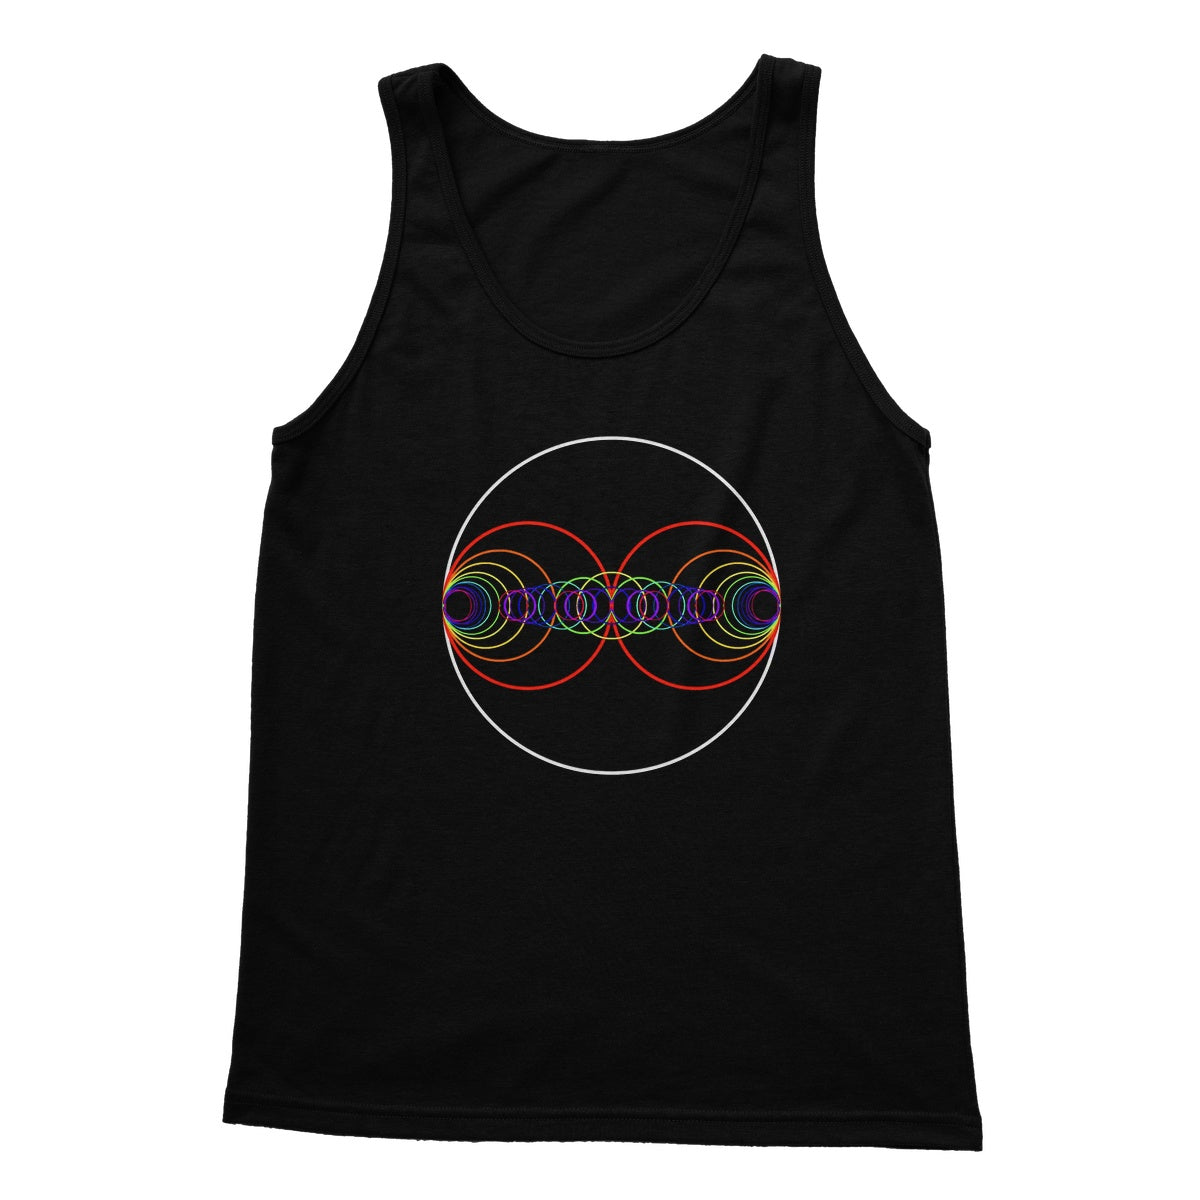 Sound waves Collide Softstyle Tank Top